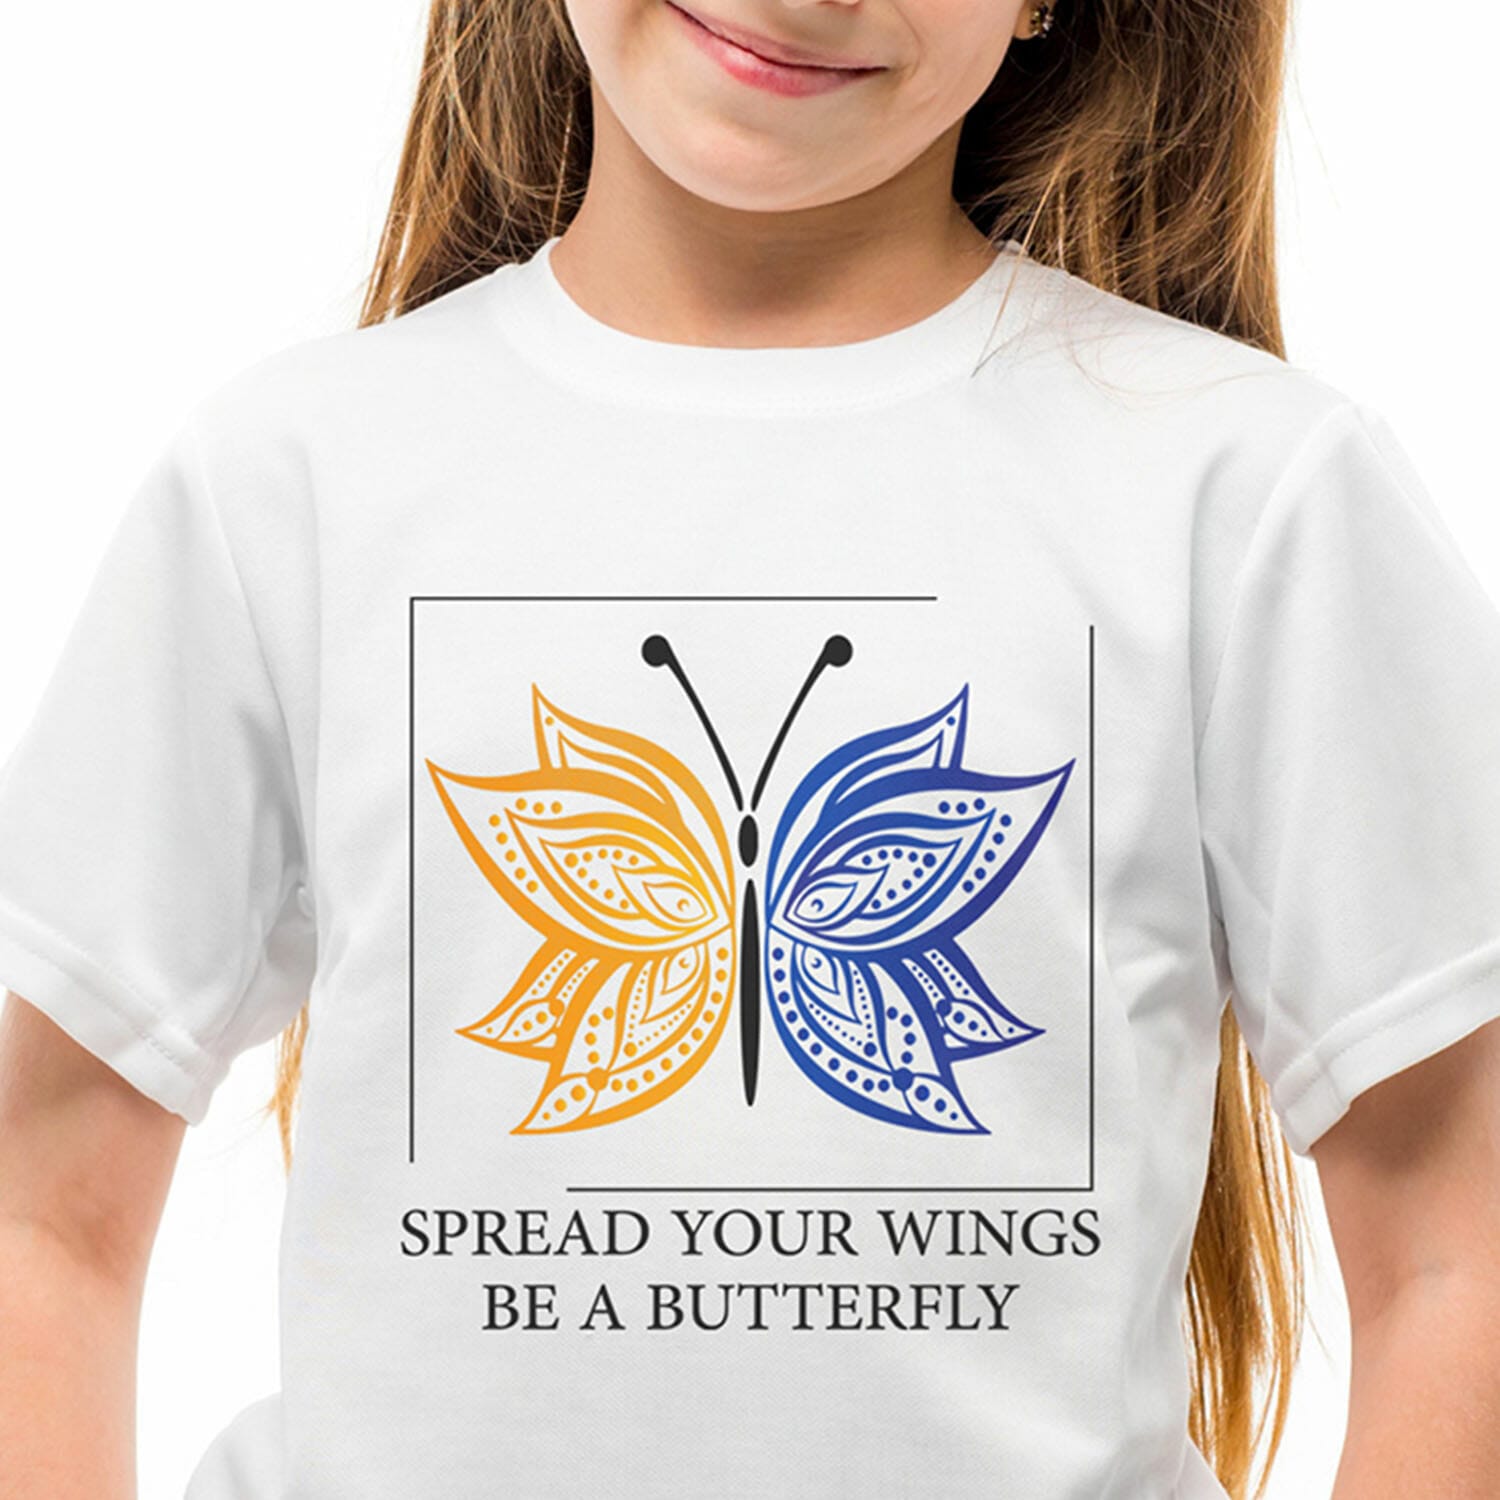 Delight your little ones with our 'A Butterfly' Free T-shirt Design, specially crafted for kids. Perfect for adding whimsy and color to their wardrobe!